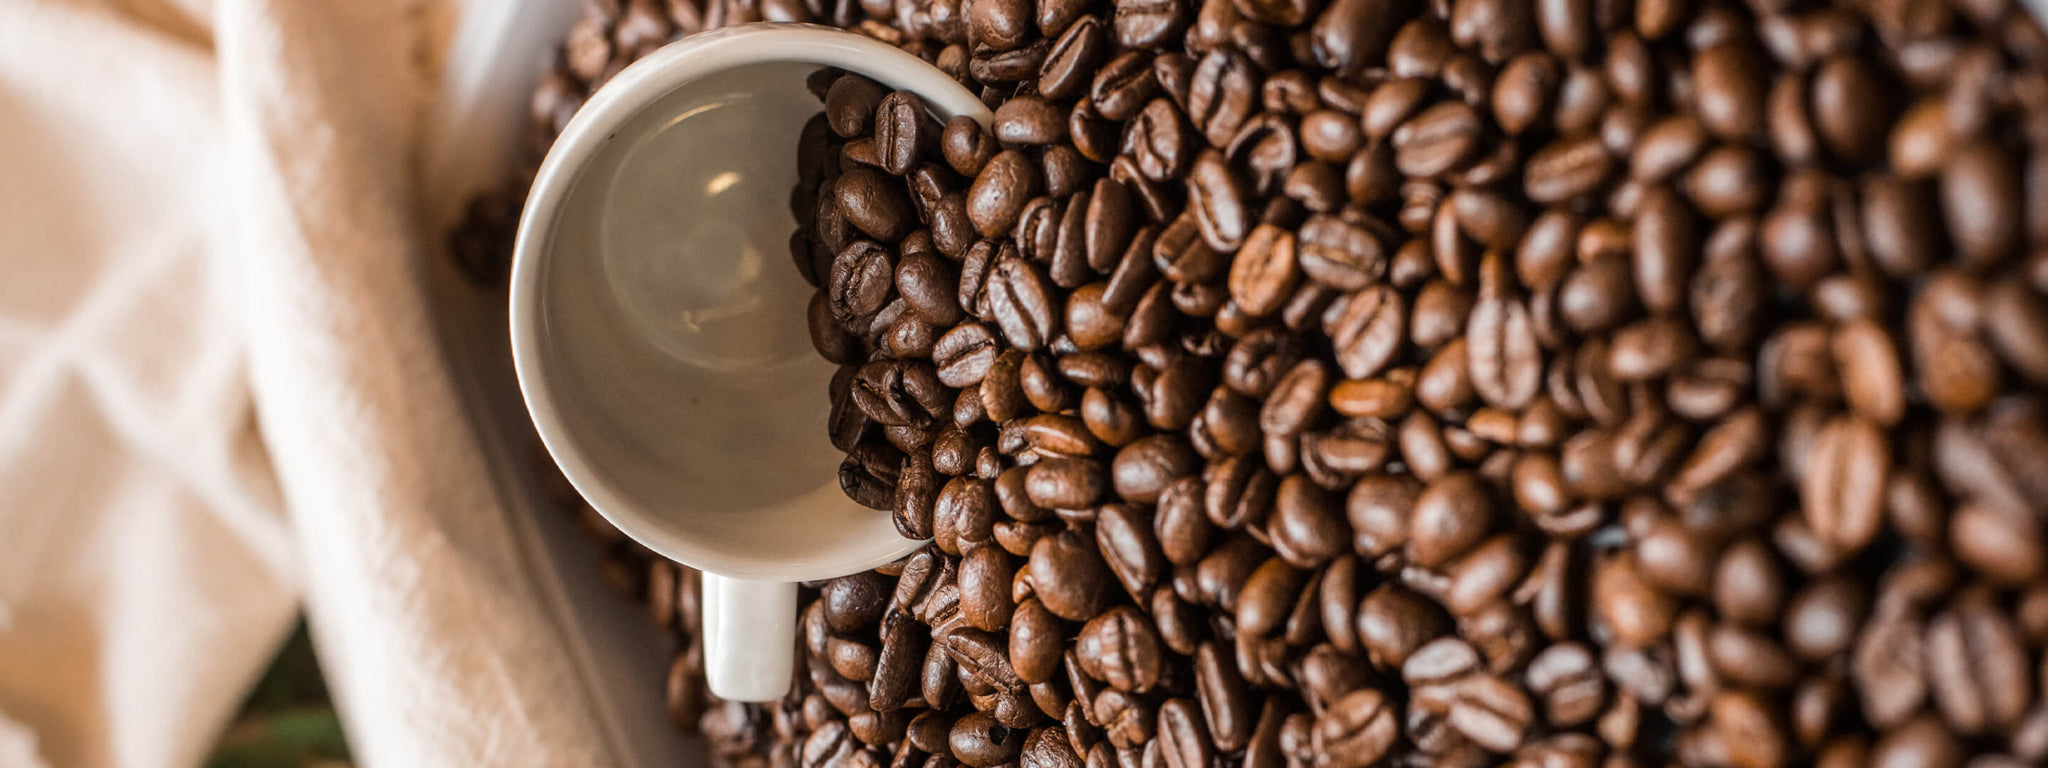 How to Make the Perfect Cup of Coffee in a Sustainable Way